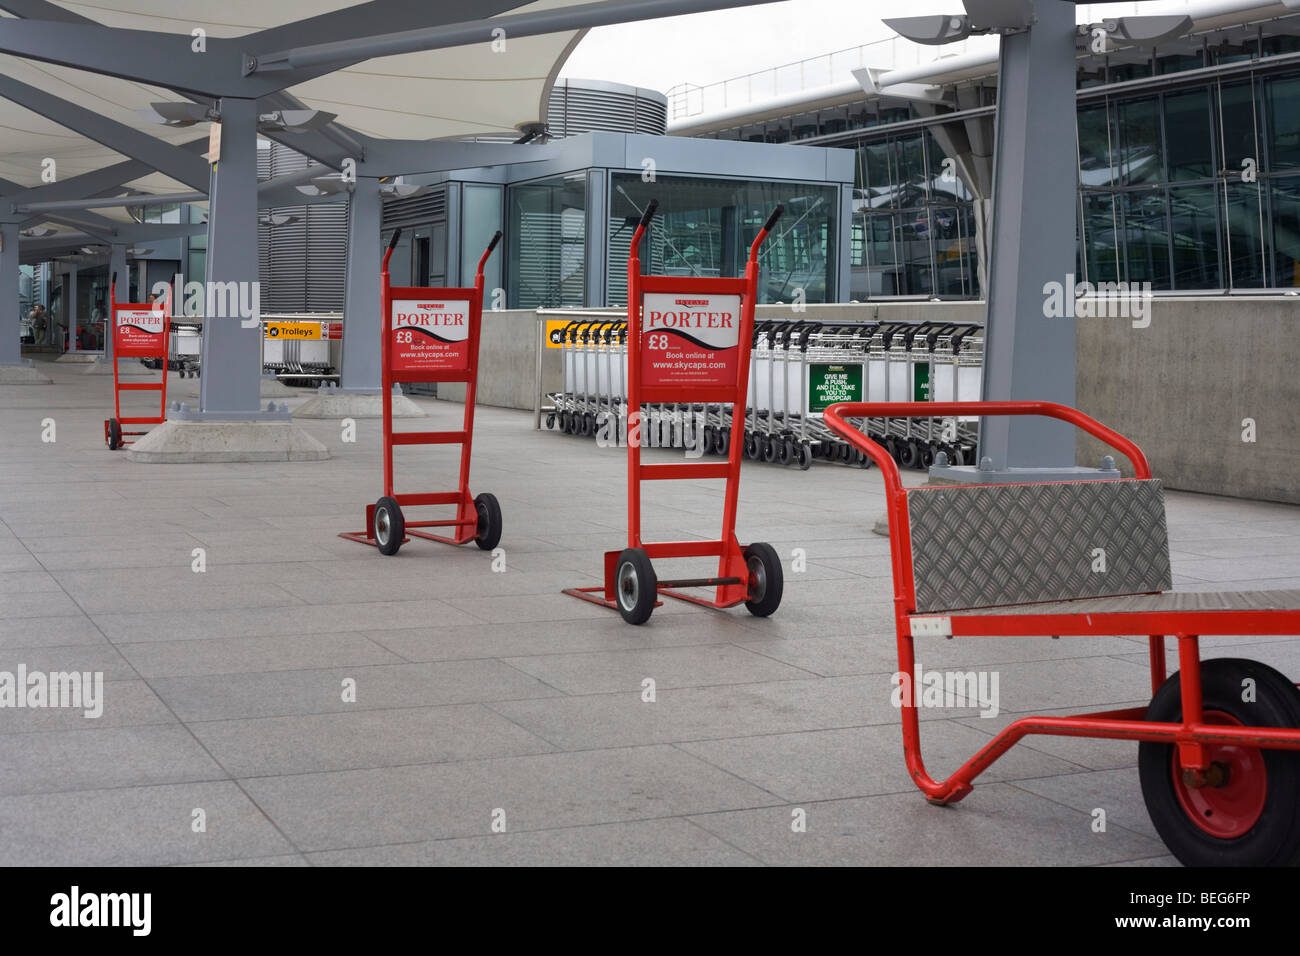 Skycap baggage trolleys line up awaiting business on the upper level in Departures at Heathrow airport's Terminal 5. Stock Photo